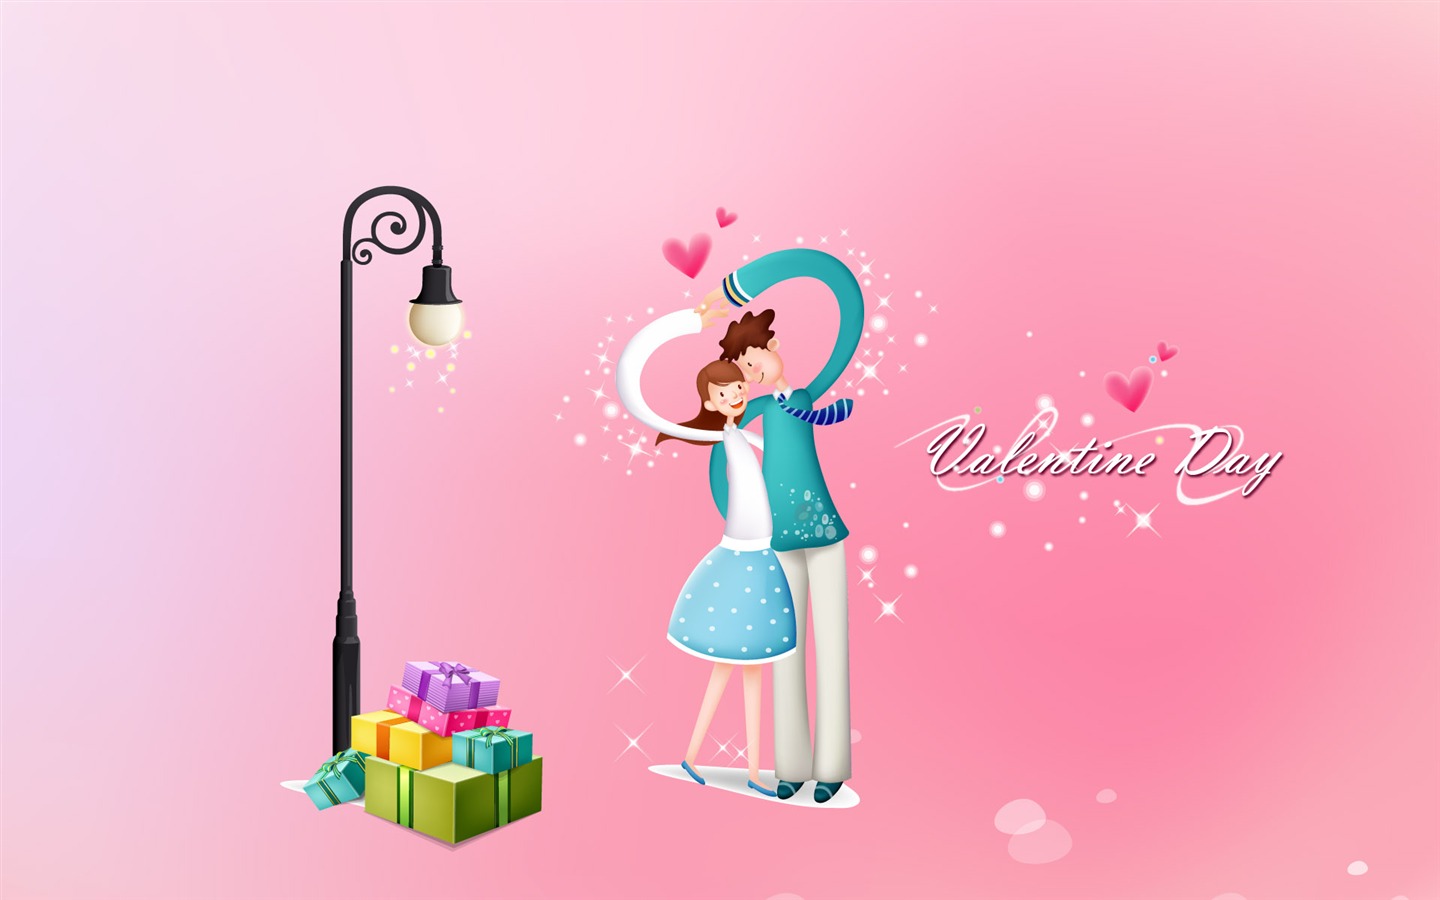 Valentine's Day Theme Wallpapers (2) #20 - 1440x900